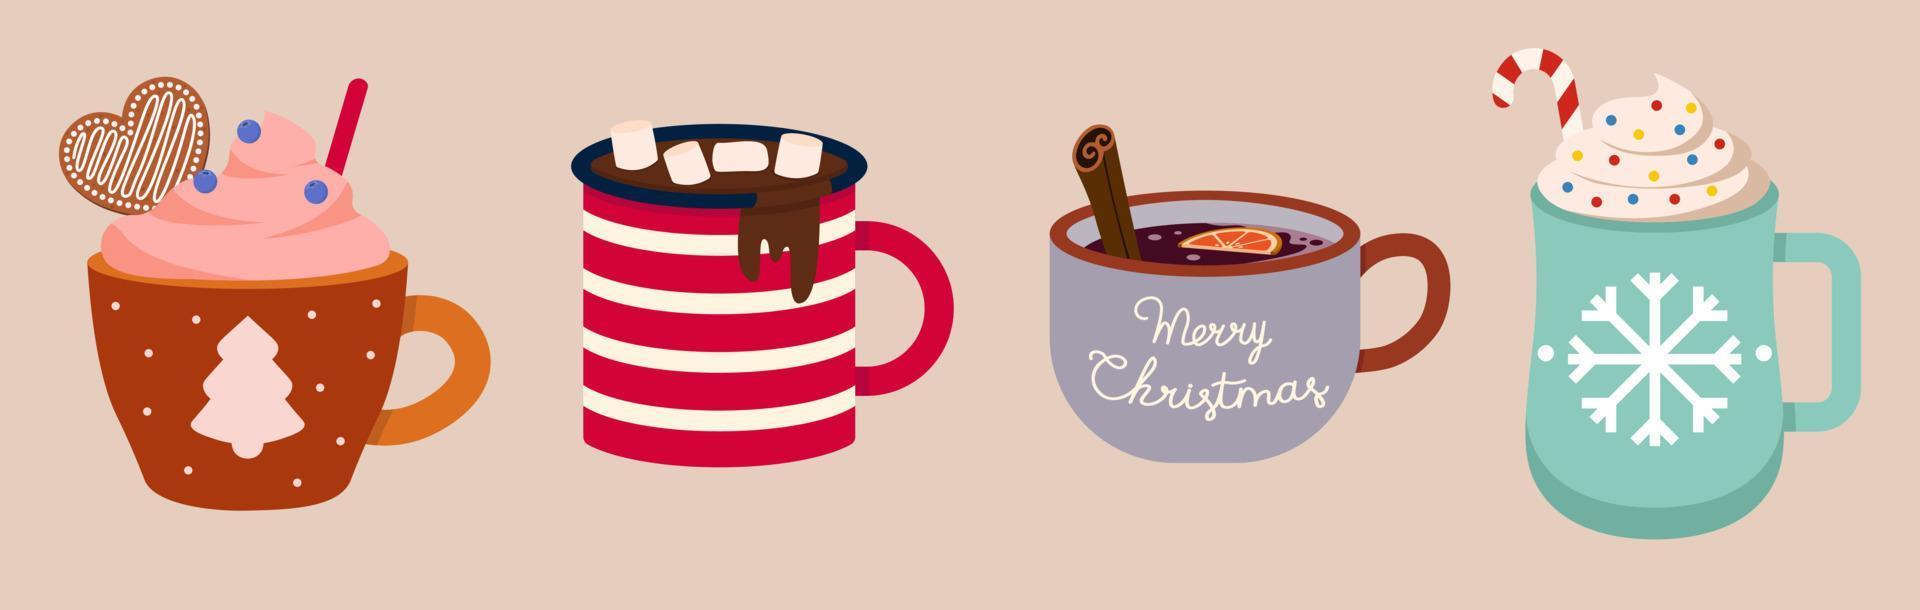 Set Of Christmas Beverages, Drinks With Marshmallow Colorful Vector Illustration In Flat Style